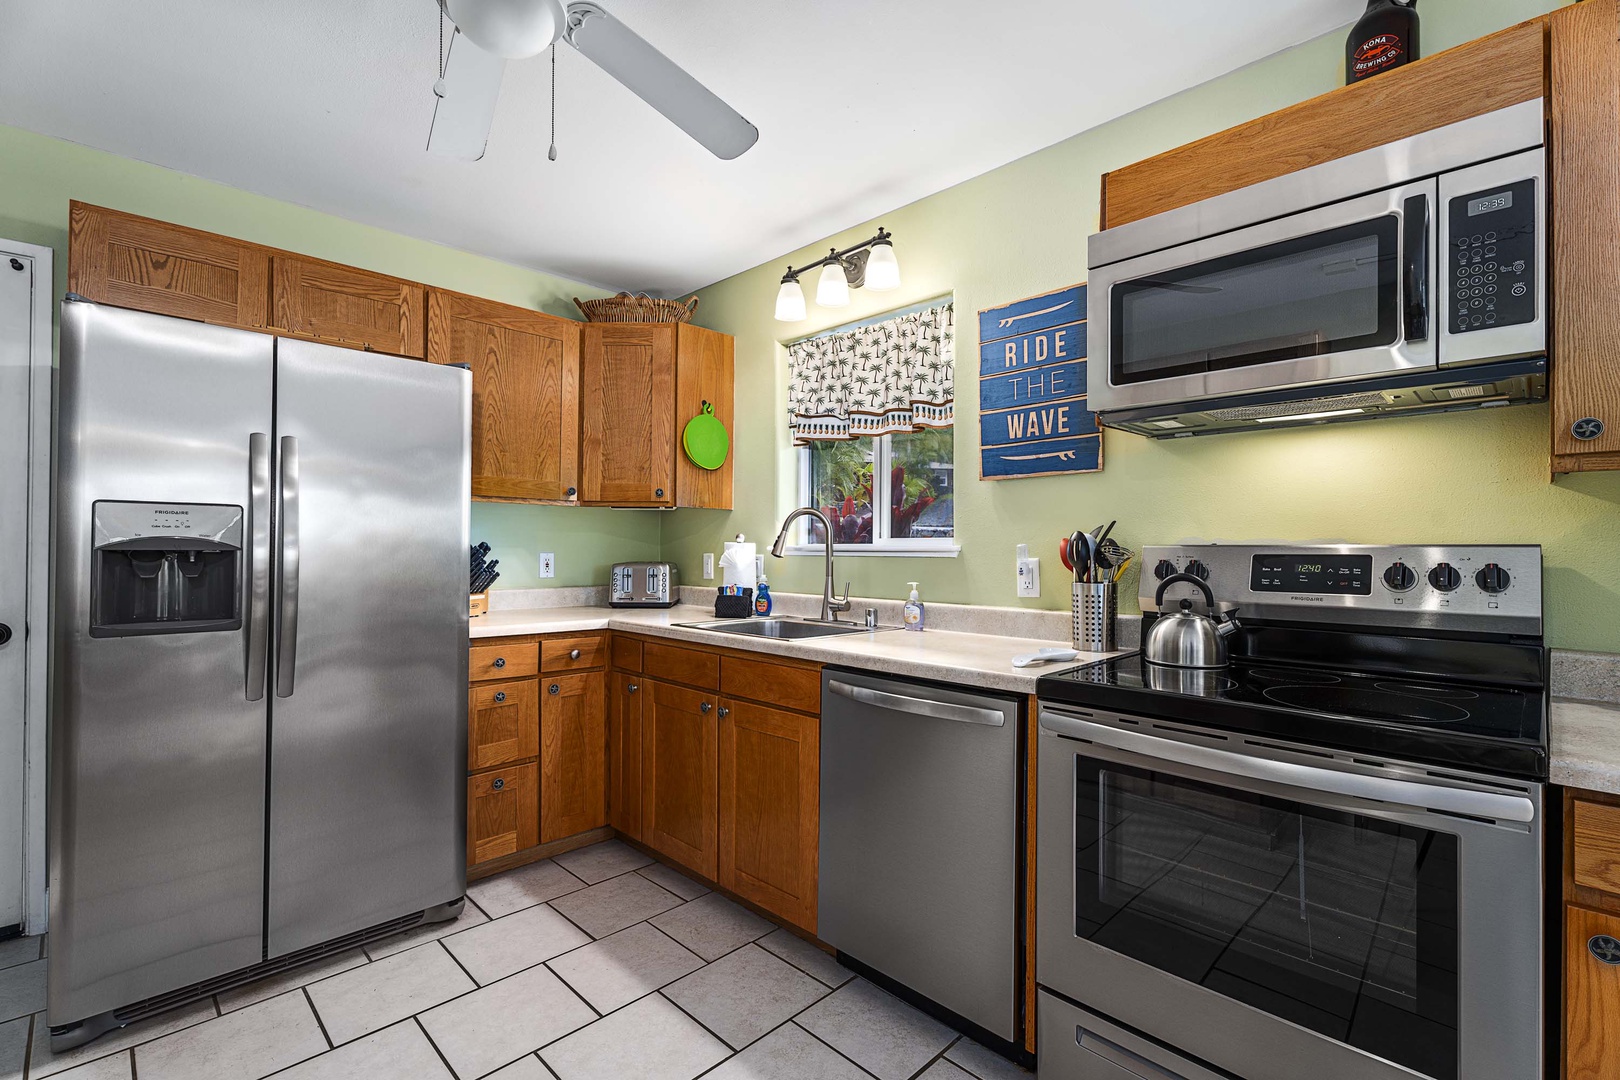 Kailua Kona Vacation Rentals, Hale A Kai - Stainless appliances throughout the fully equipped kitchen